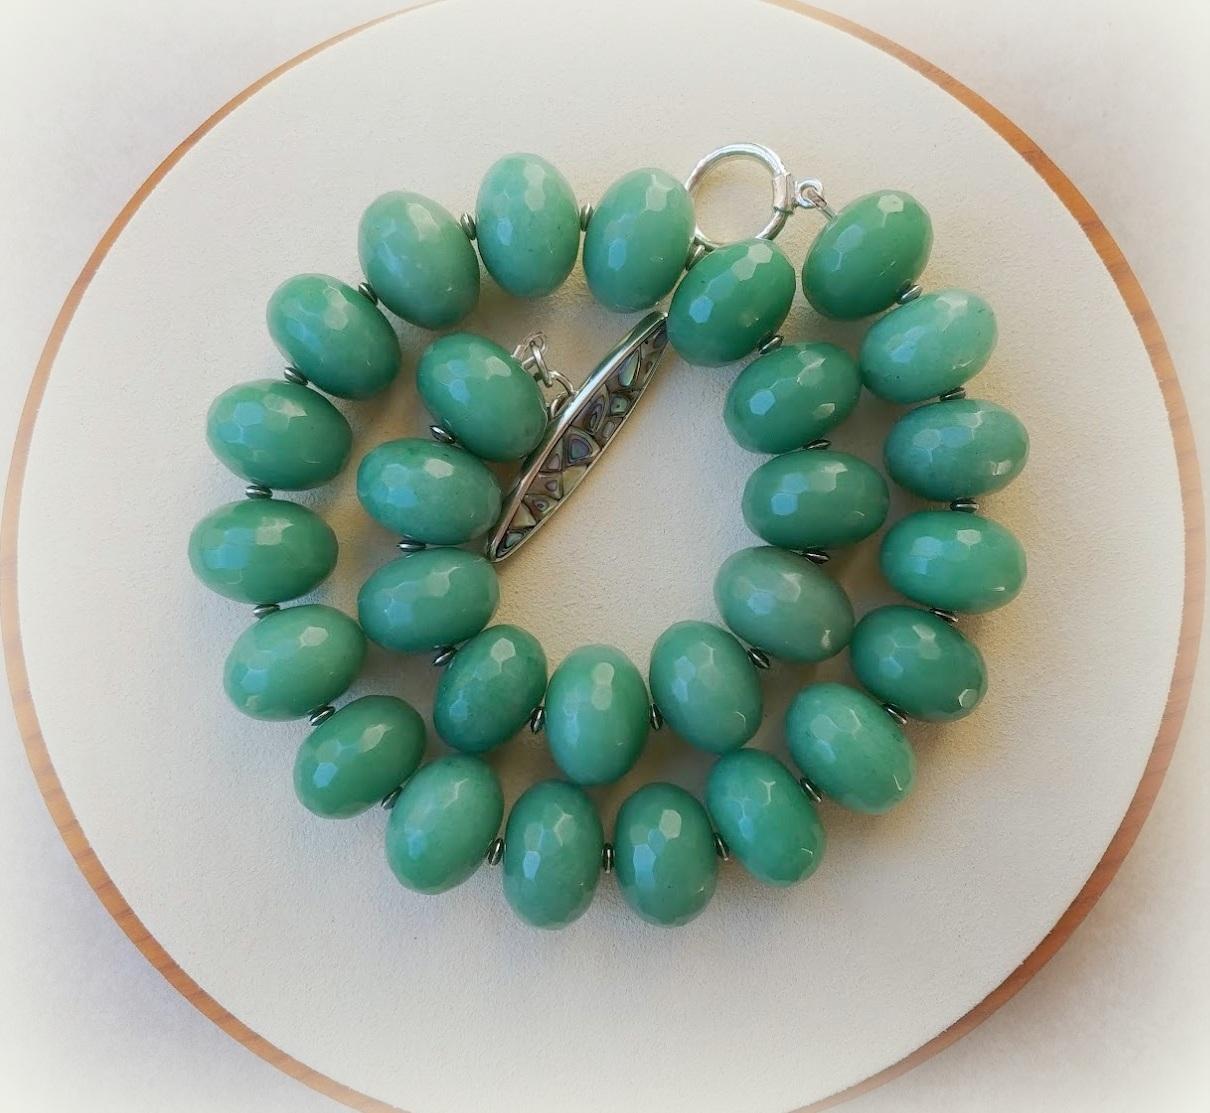 The necklace is 18.5 inches long (47 cm) and weighs 241.5 grams (8.5 oz).
The aventurine faceted rondelle beads are 20 mm in diameter, and the silver spacer beads are 4mm in diameter and tested as 925 sterling silver.
The necklace is fastened with a